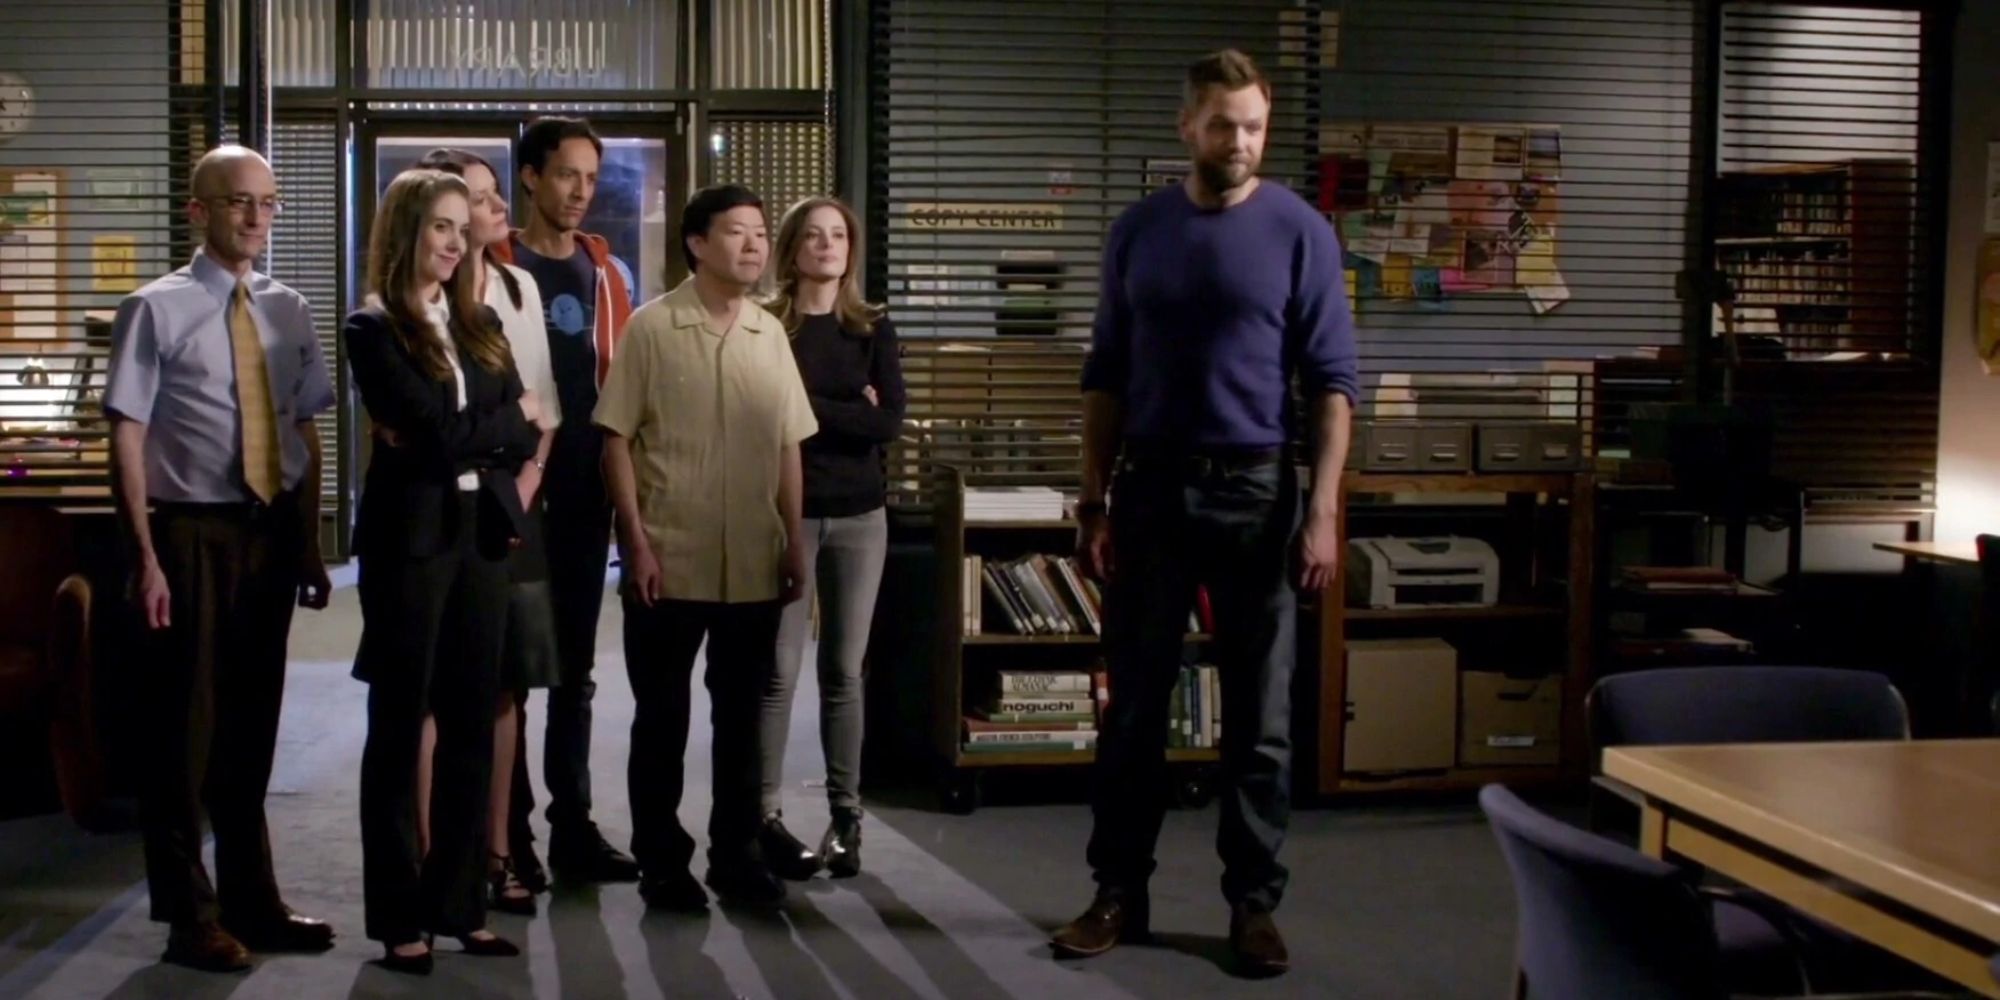 Dean, Annie, Frankie, Abed, Chang, Britta, and Jeff in the study room